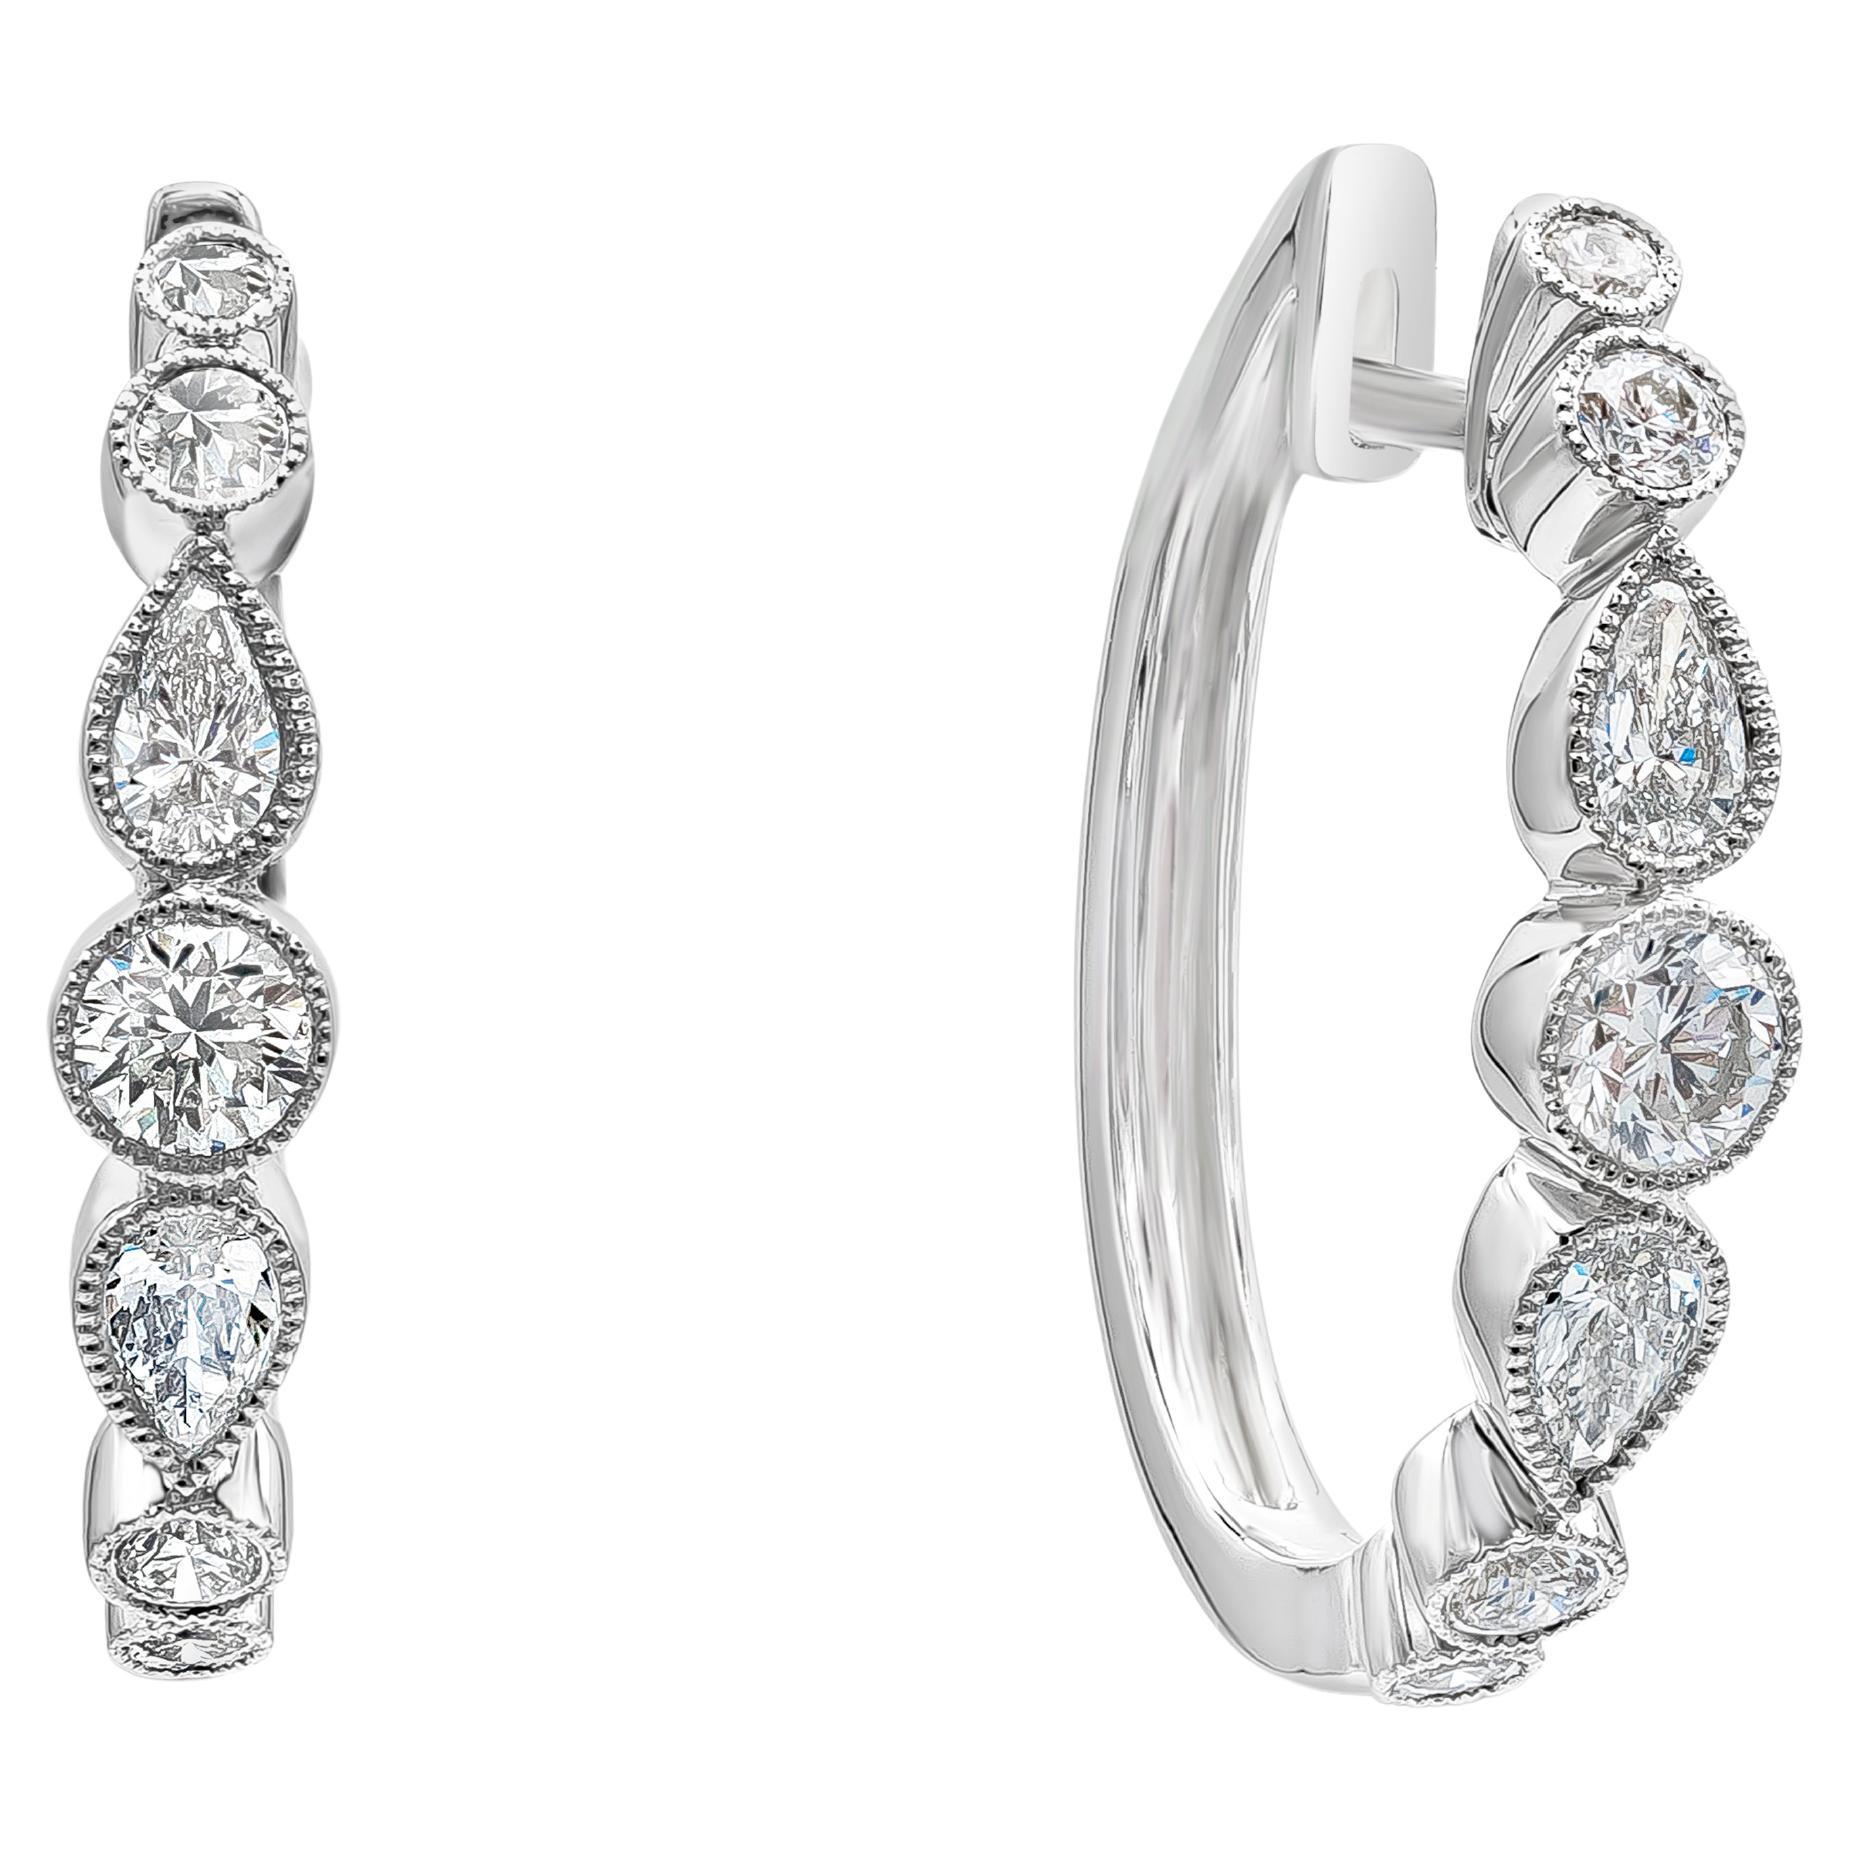 Roman Malakov 0.78 Carats Total Pear and Round Diamond Hoop Earrings For Sale